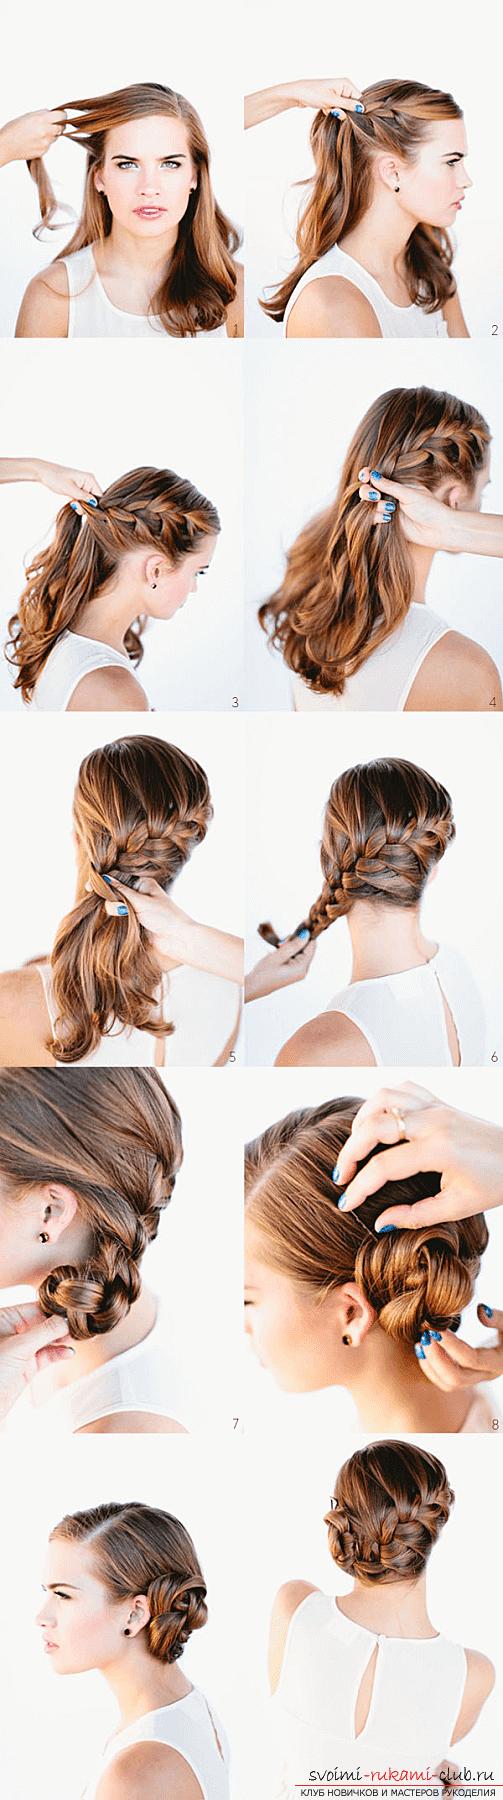 Interesting ideas for creating hairstyles with pigtails on medium hair themselves. Photo number 12